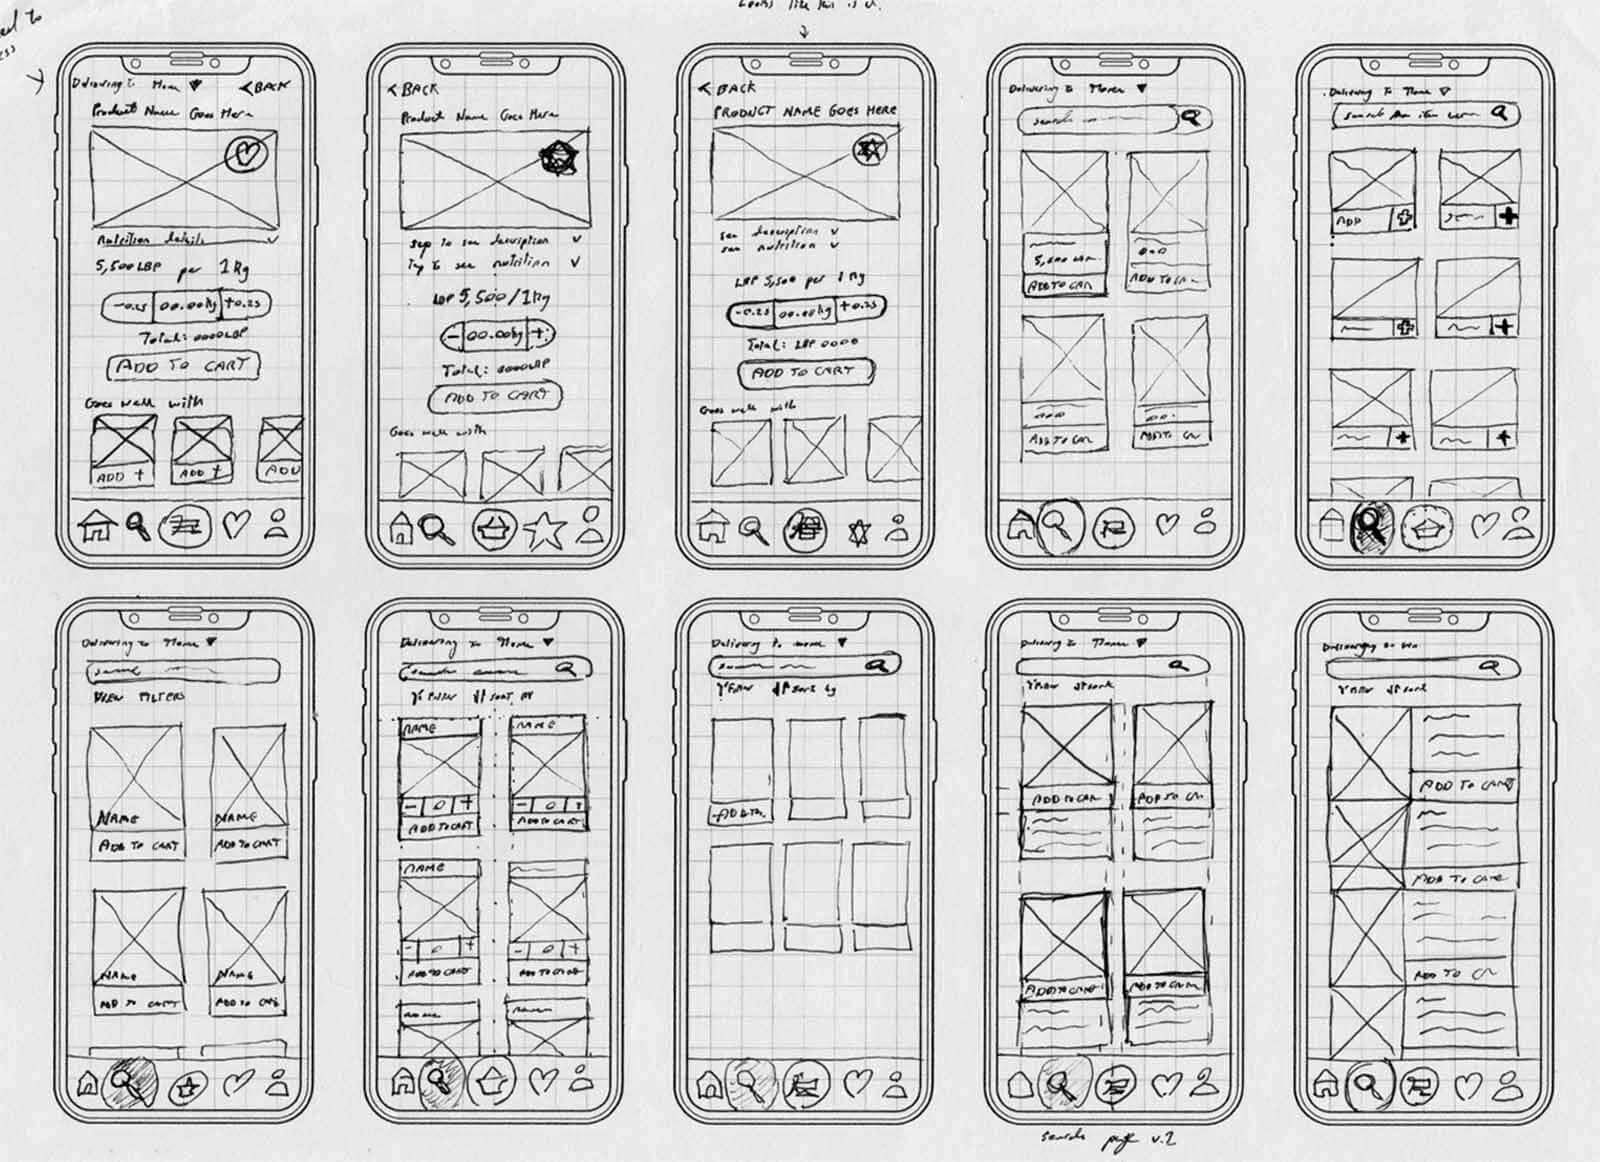 UX wireframes conceptualising the product listing pages